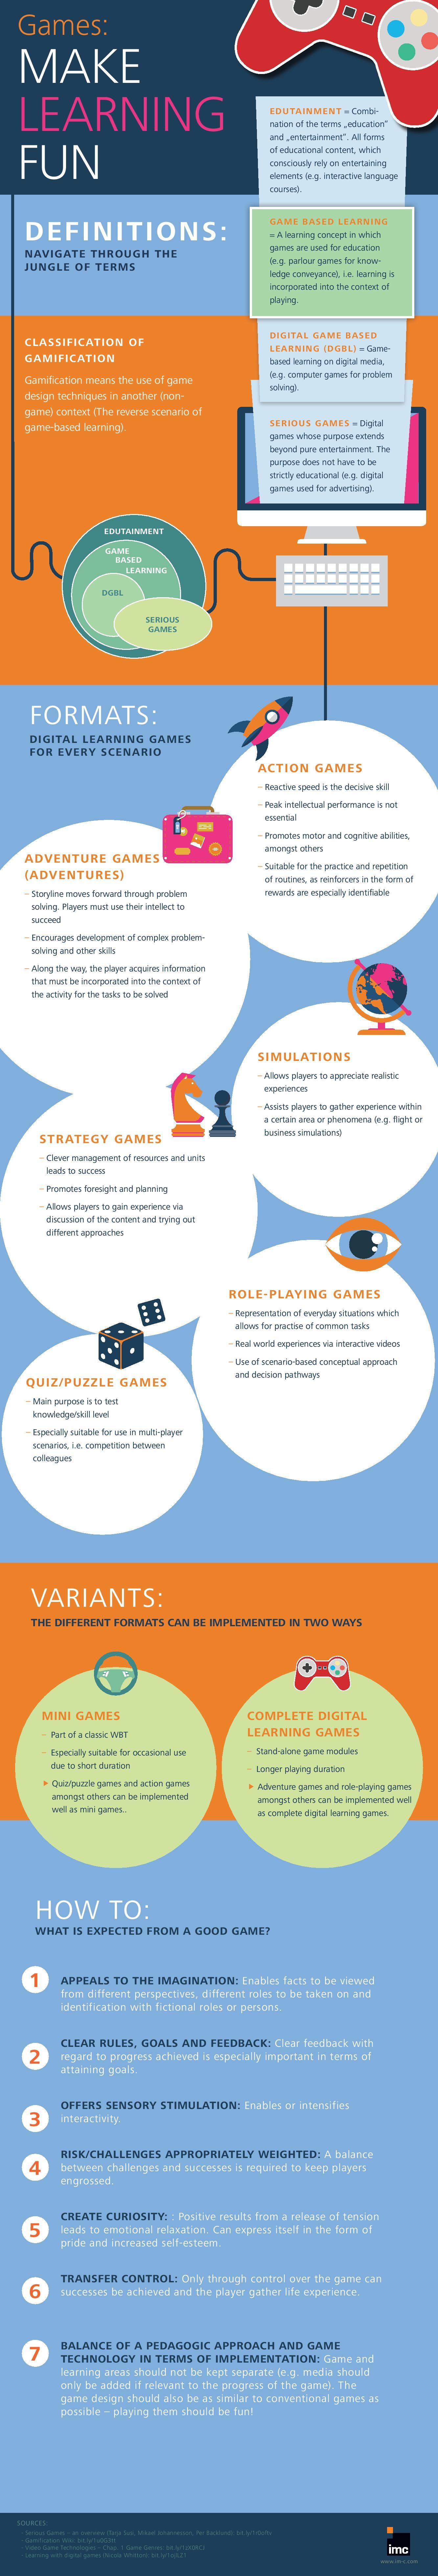 Games Make Learning Fun Infographic